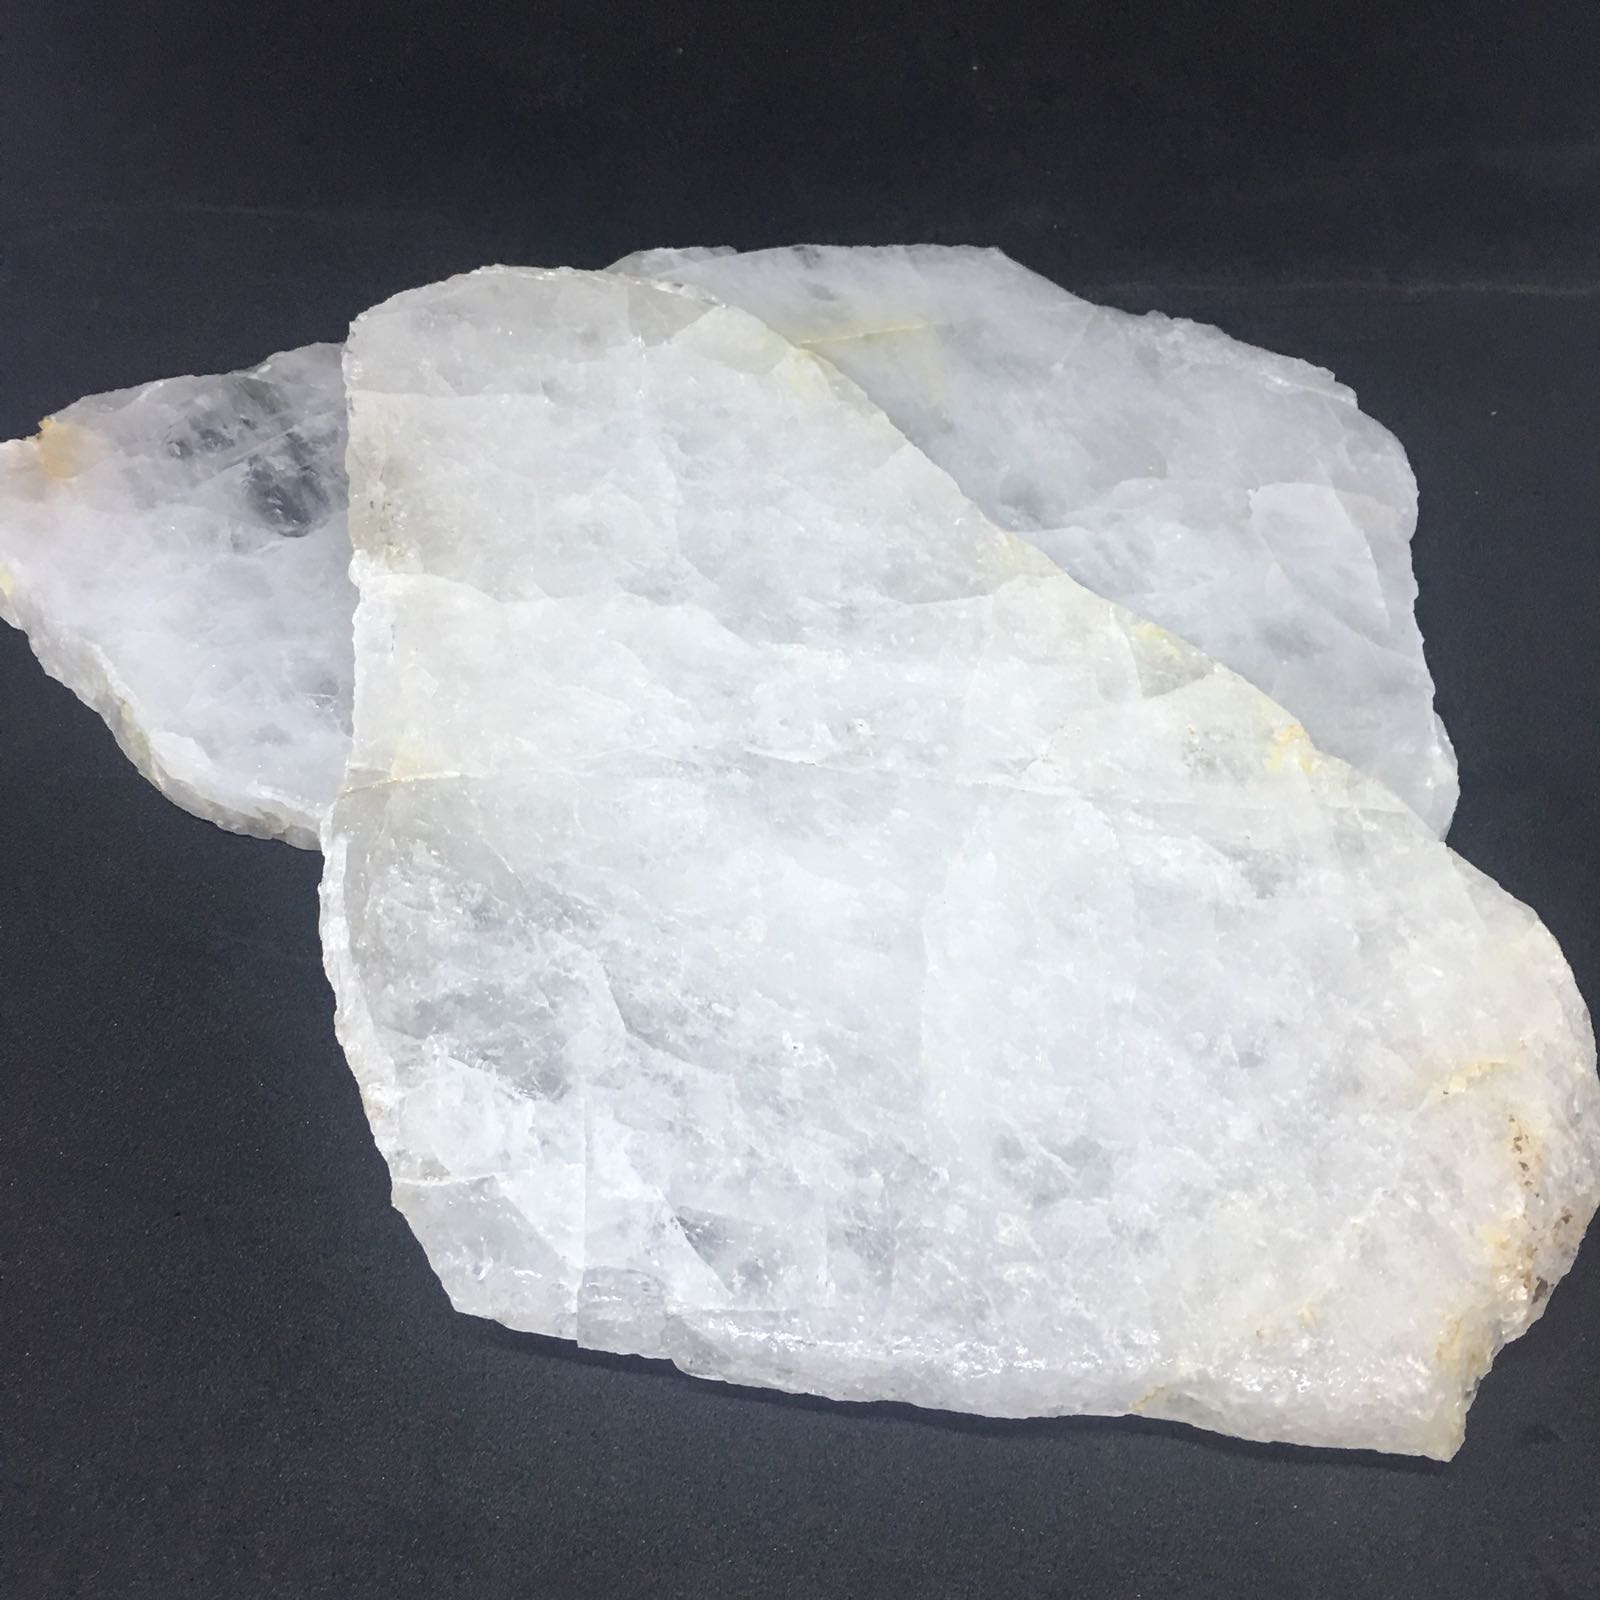 Stones from Uruguay - Snow Quartz Platter for Trivet or Table Centerpiece, Size from 23 to 30cm